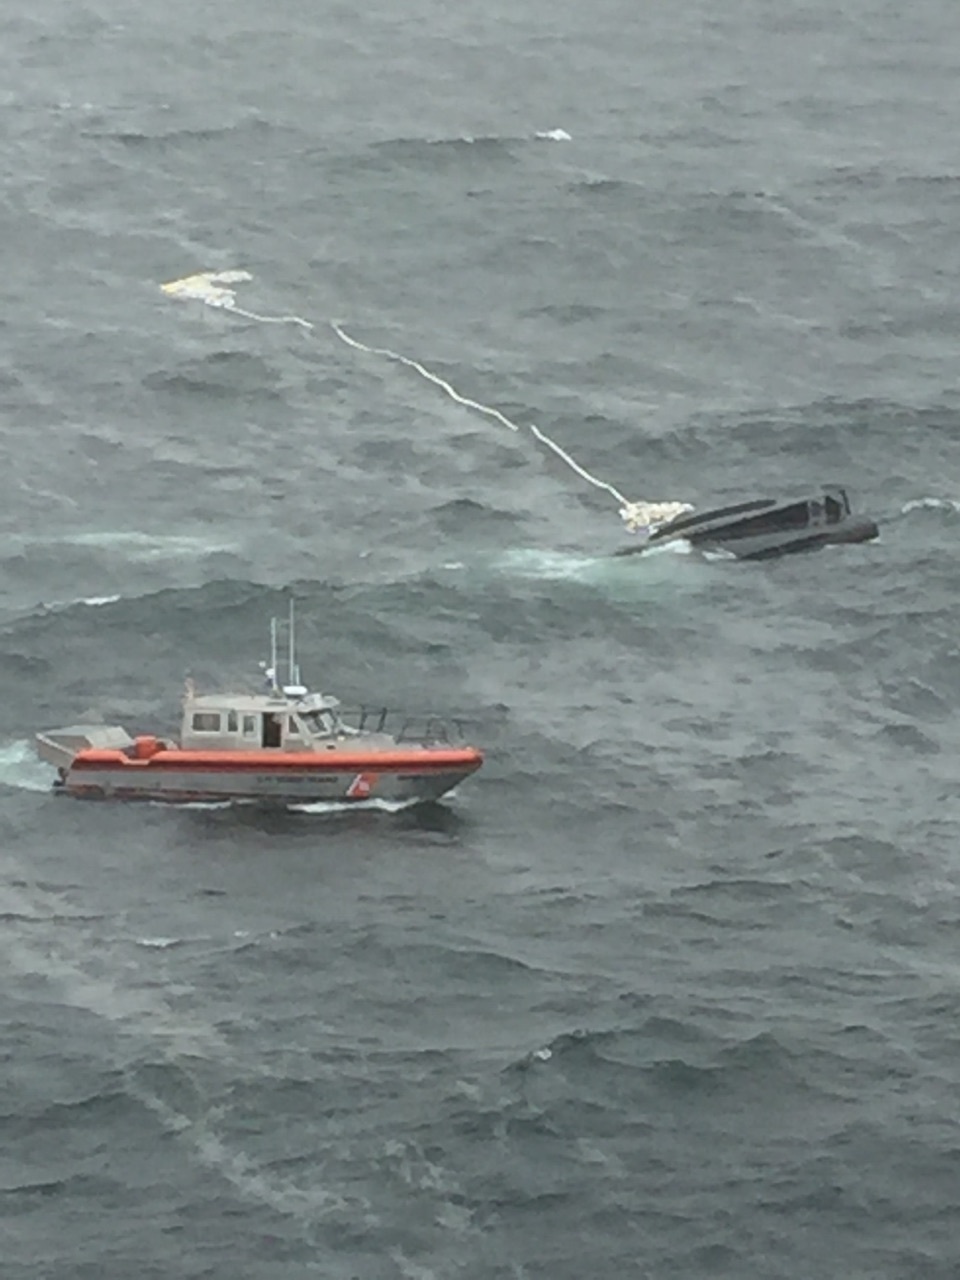 UPDATE - Coast Guard, partners continue search for two missing in Marmot Bay, Alaska